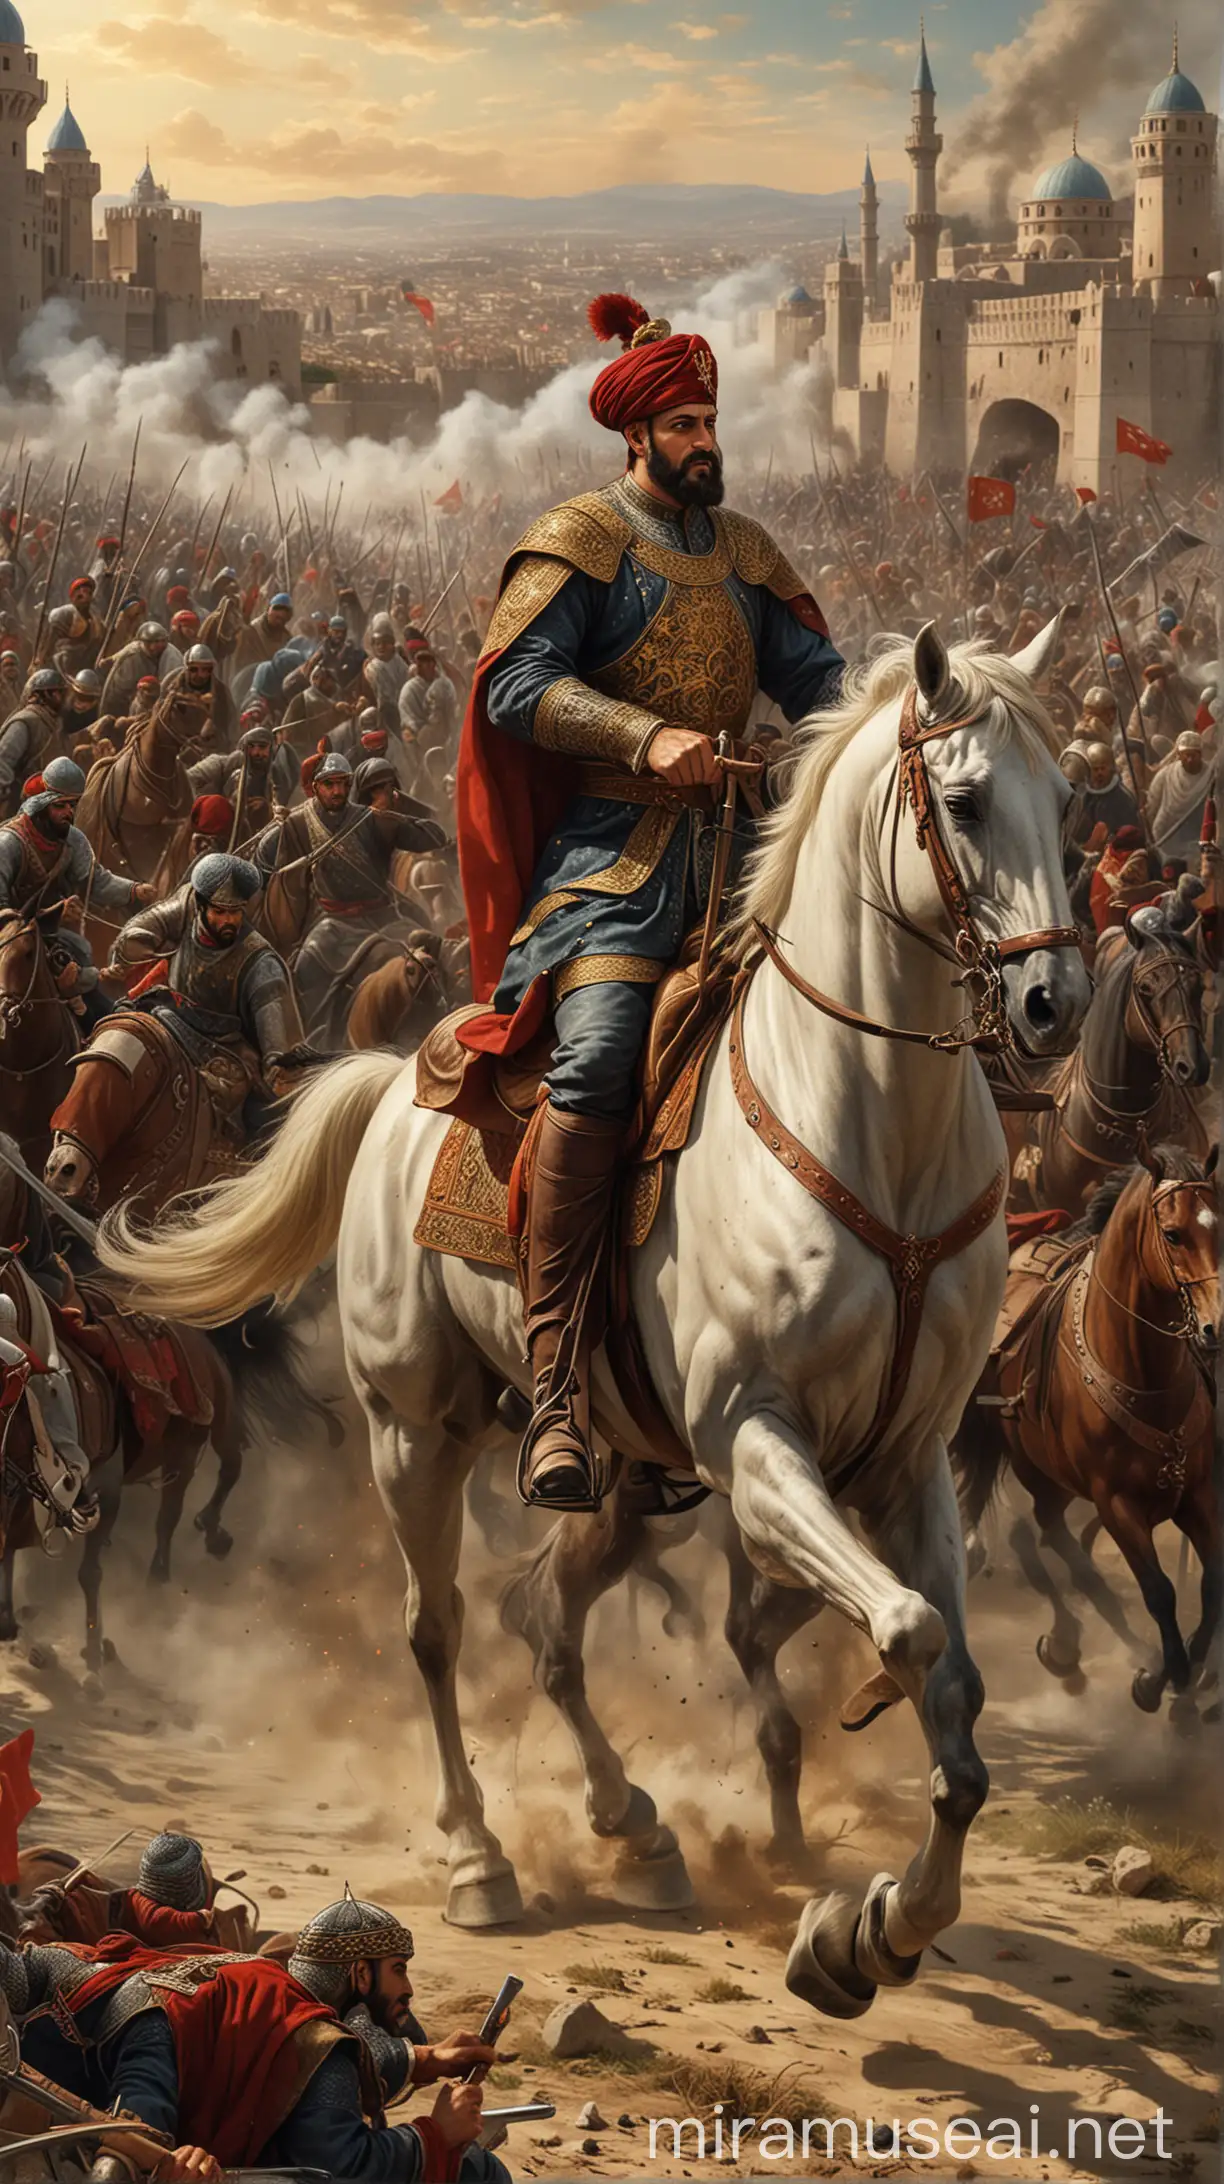 Sultan Mehmed II Leading the Siege: Illustrate Sultan Mehmed II, also known as Mehmed the Conqueror, astride his horse, directing the Ottoman forces during the siege of Constantinople. The image should capture his determination and leadership.

